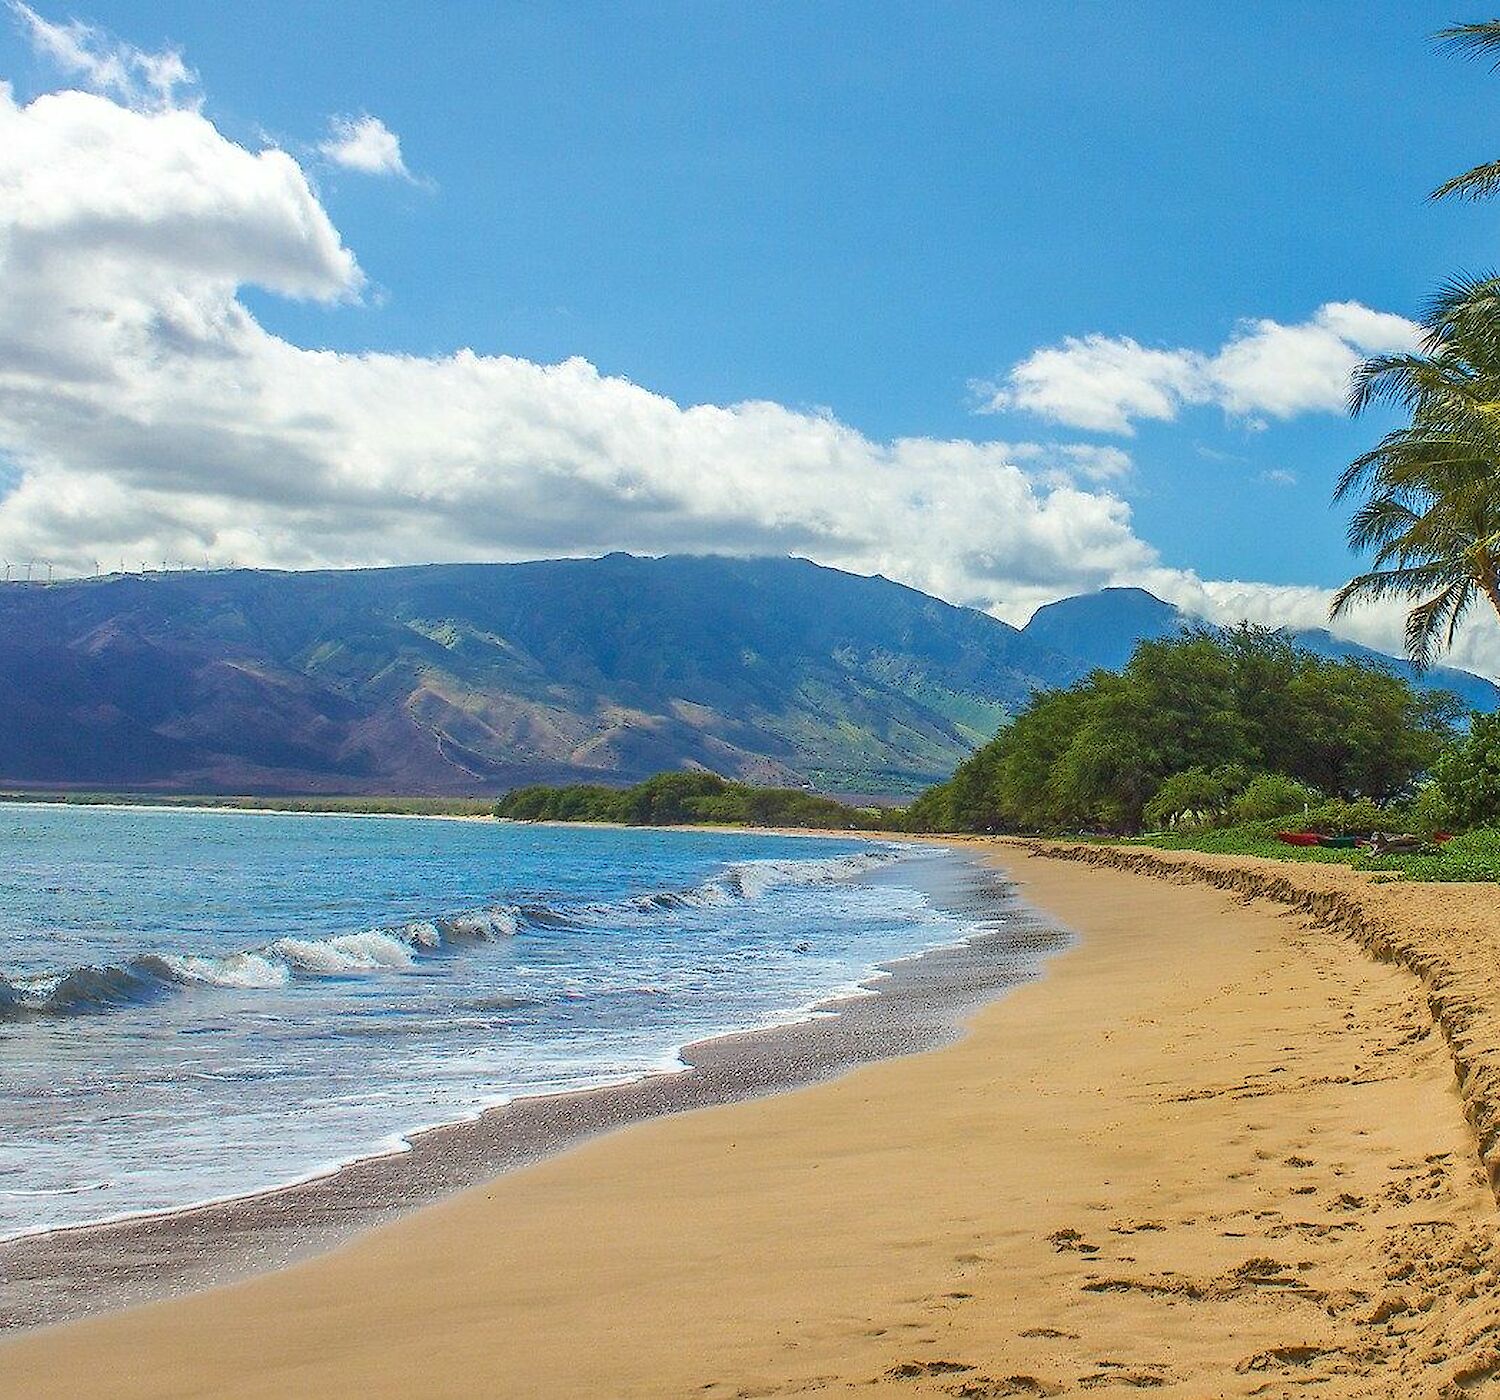 A serene beach with palm trees lining the golden sand, gentle waves, and a backdrop of lush green mountains under a partly cloudy blue sky.